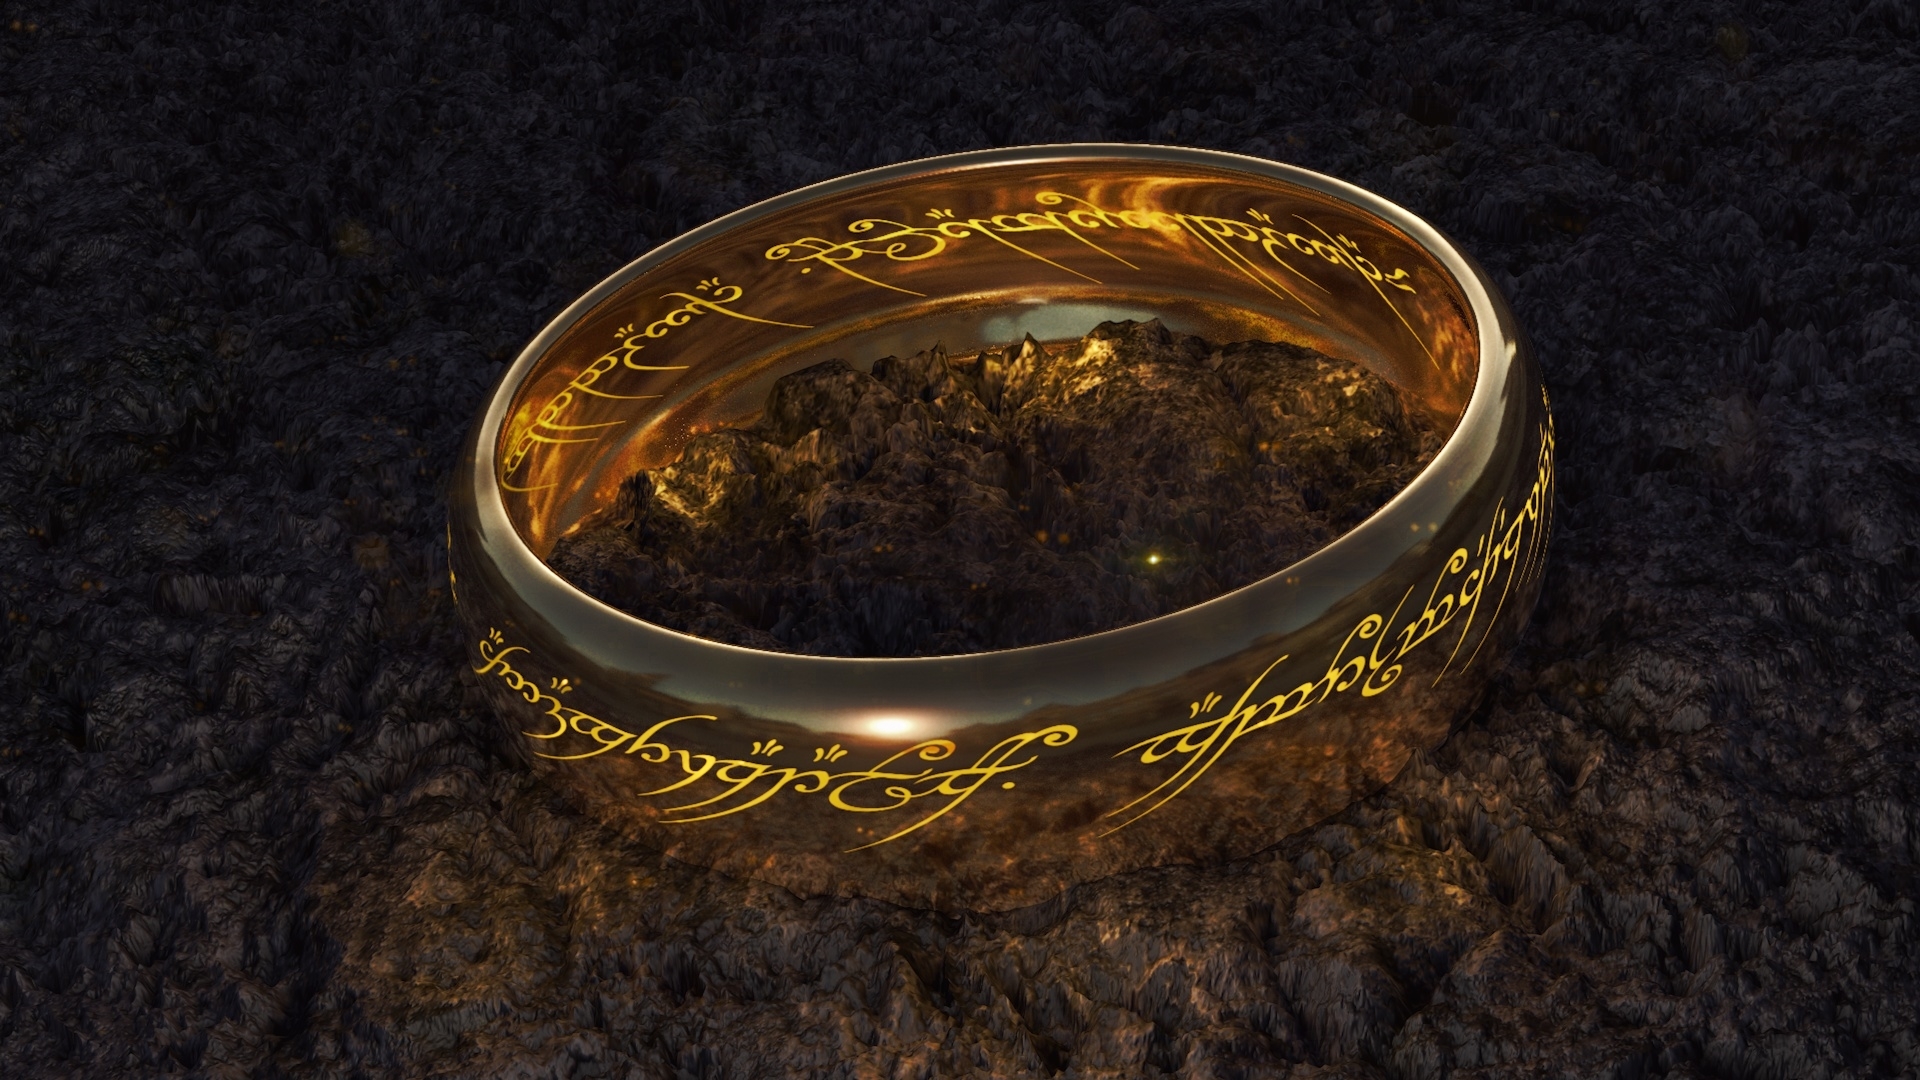 Lord Of The Rings Live Wallpaper - 1920x1080 Wallpaper 